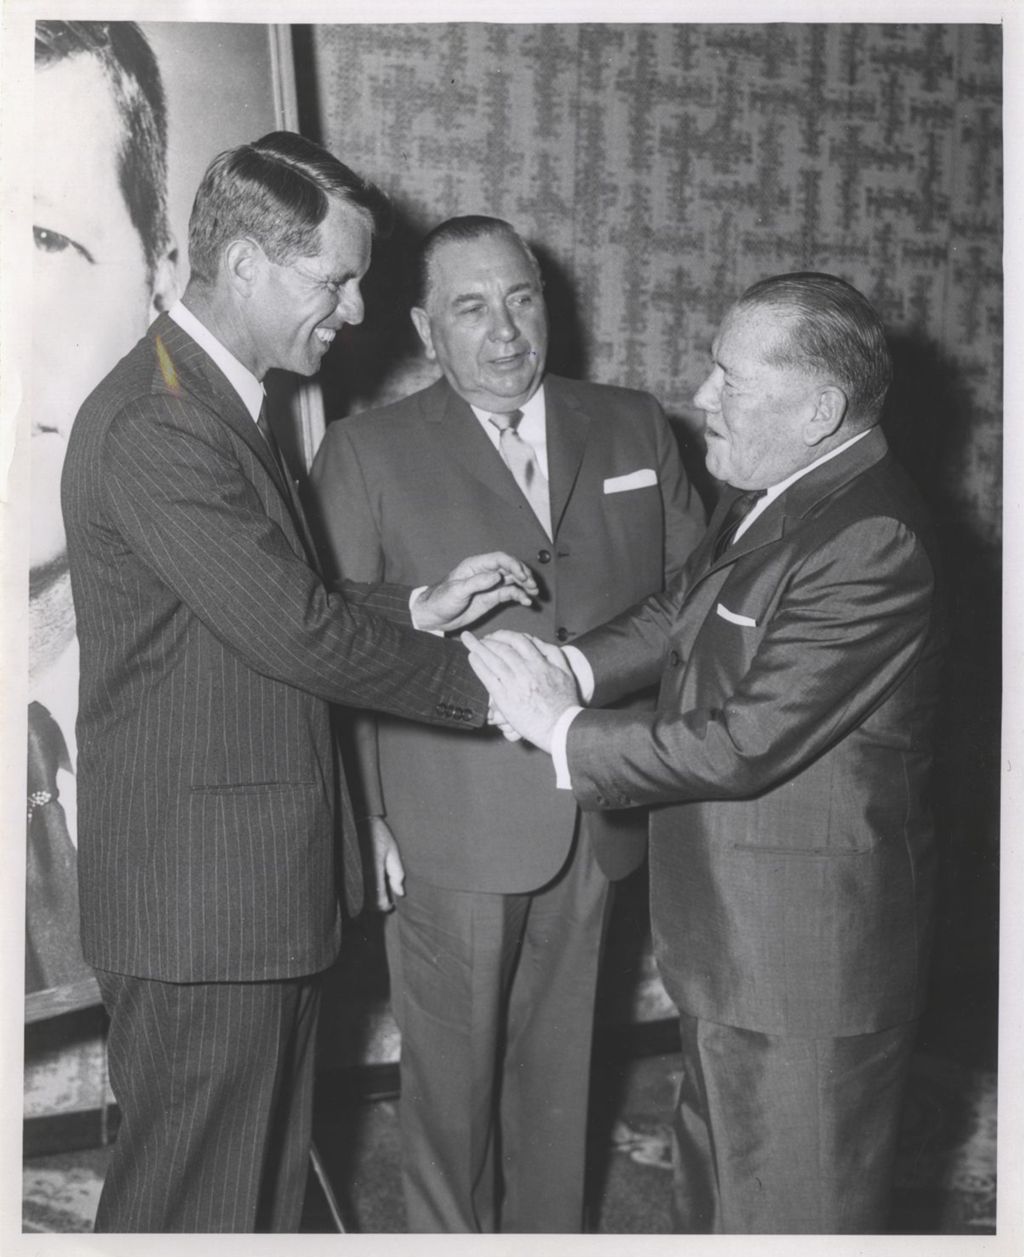 Miniature of Robert F. Kennedy, P.J. Cullerton, and Richard J. Daley at an exhibition